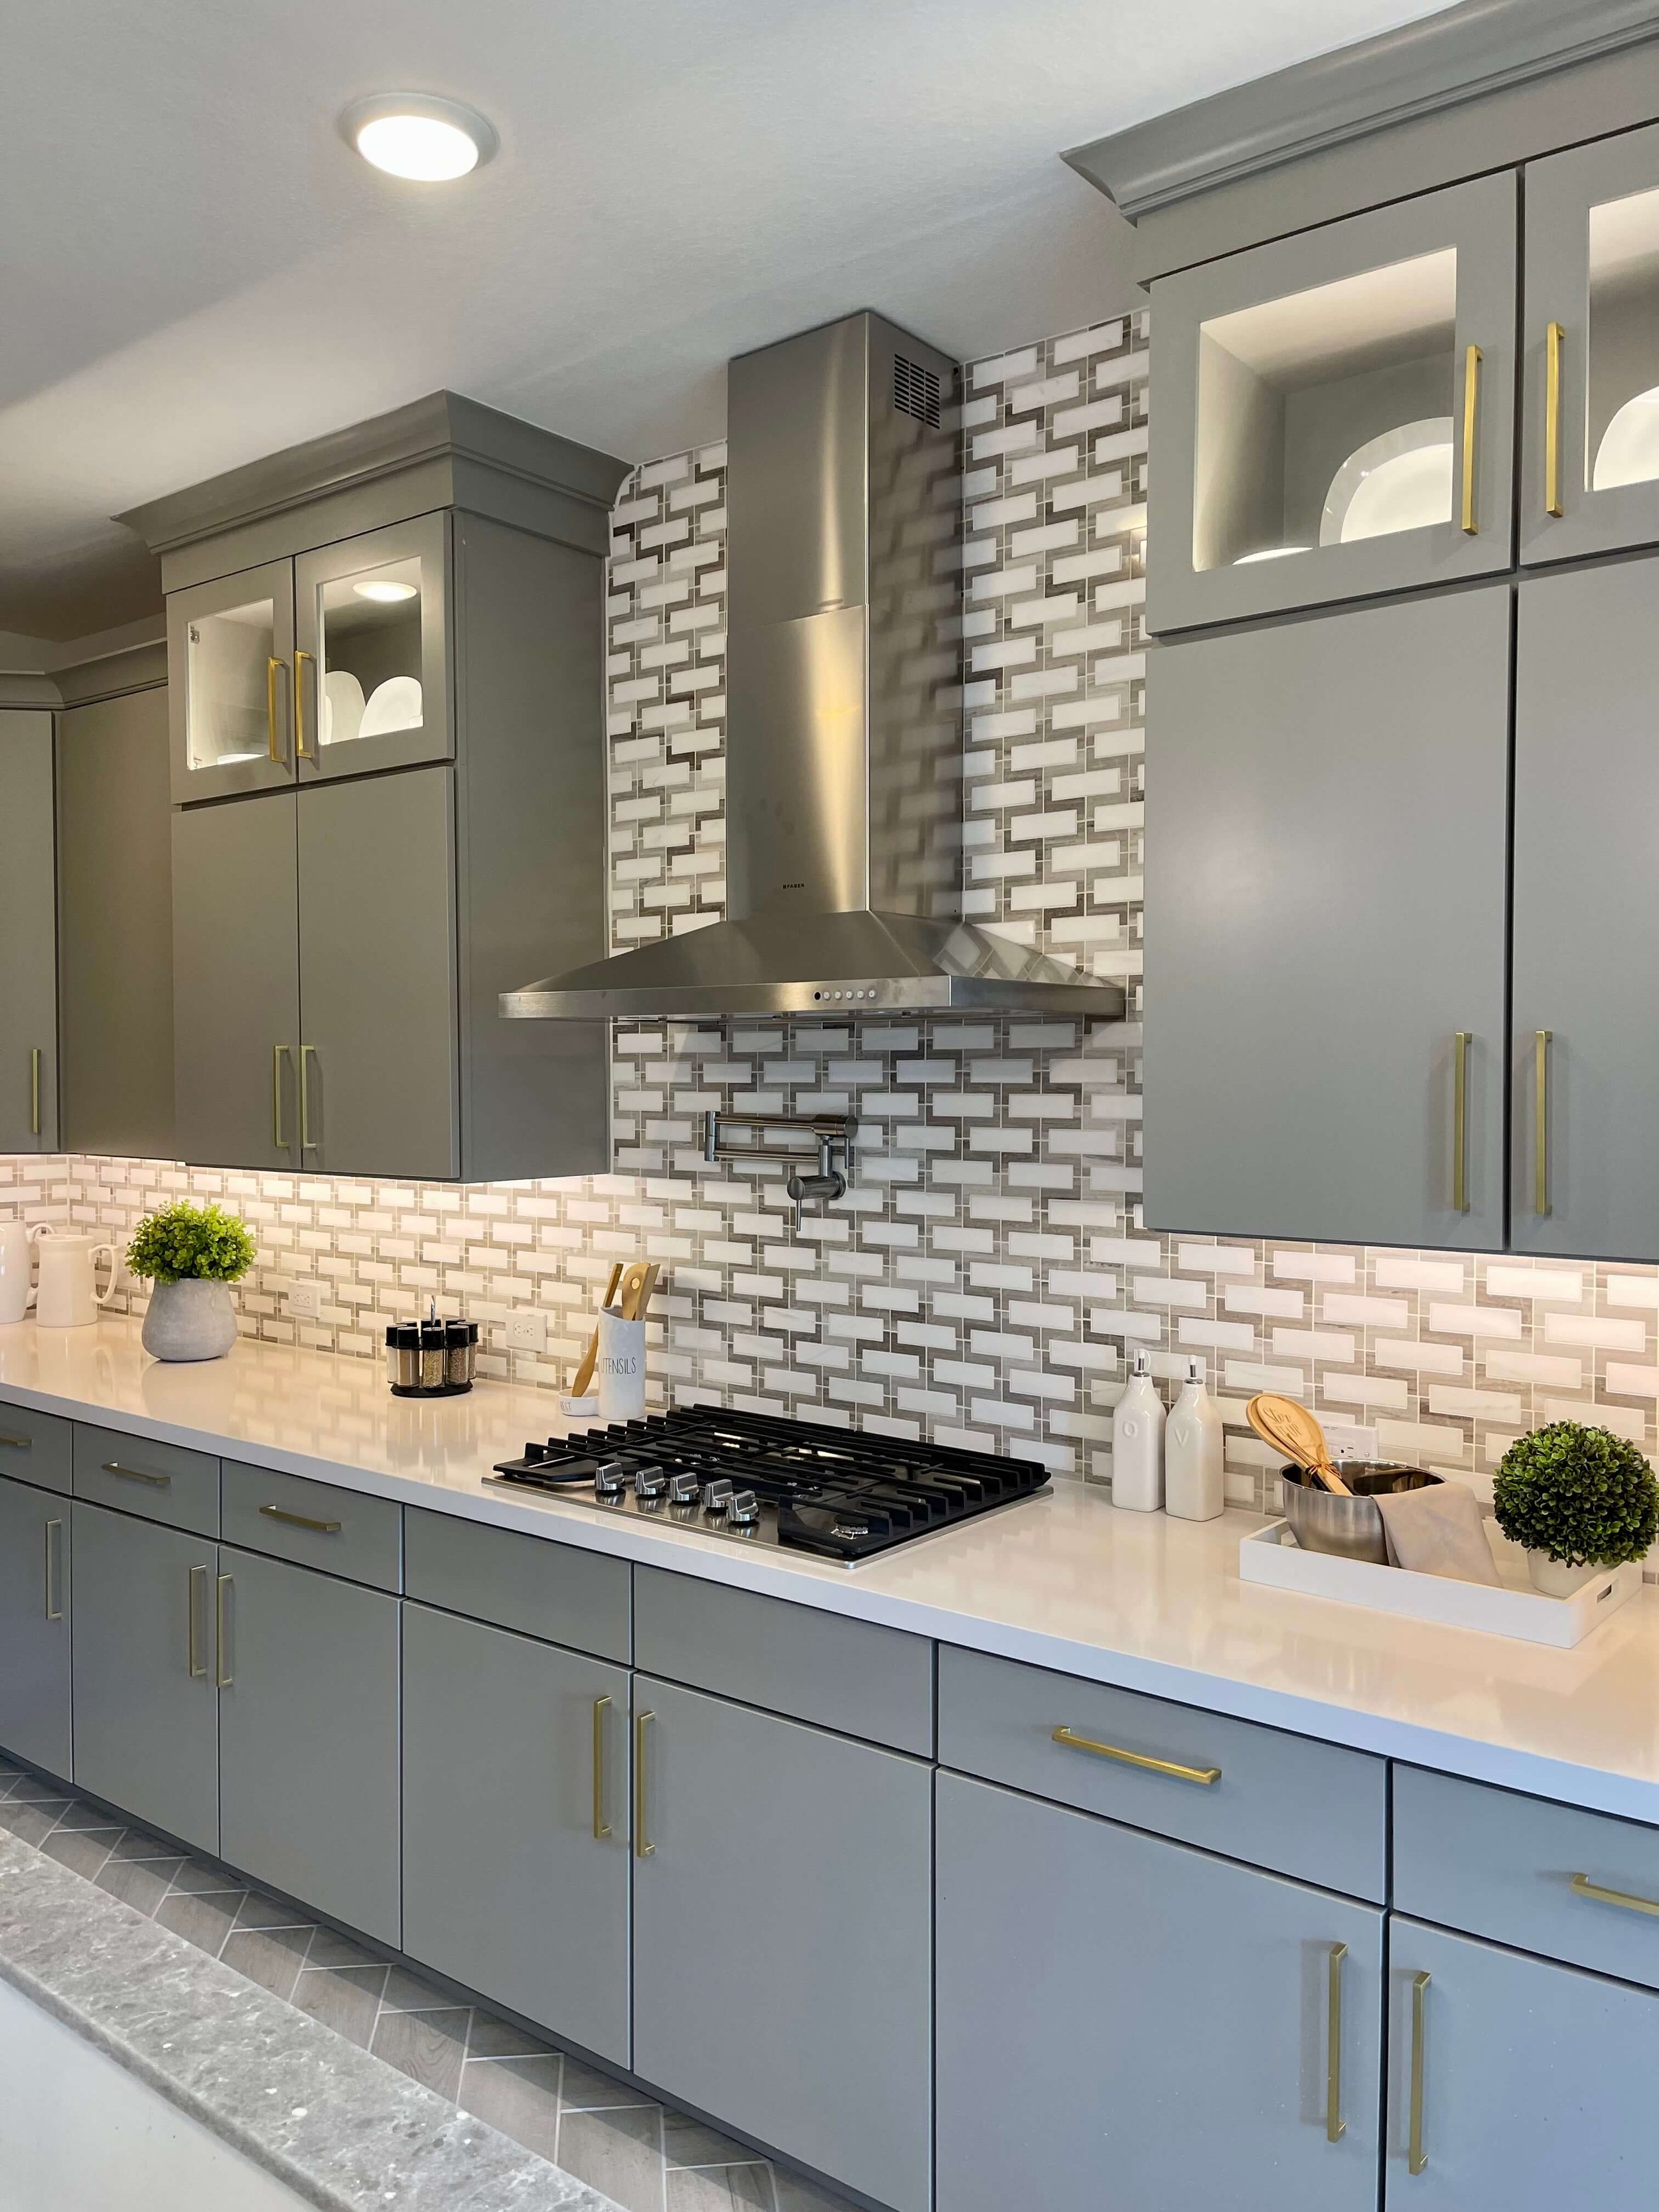 5 Tips for Designing a Range Hood Wall in Your Kitchen — DESIGNED